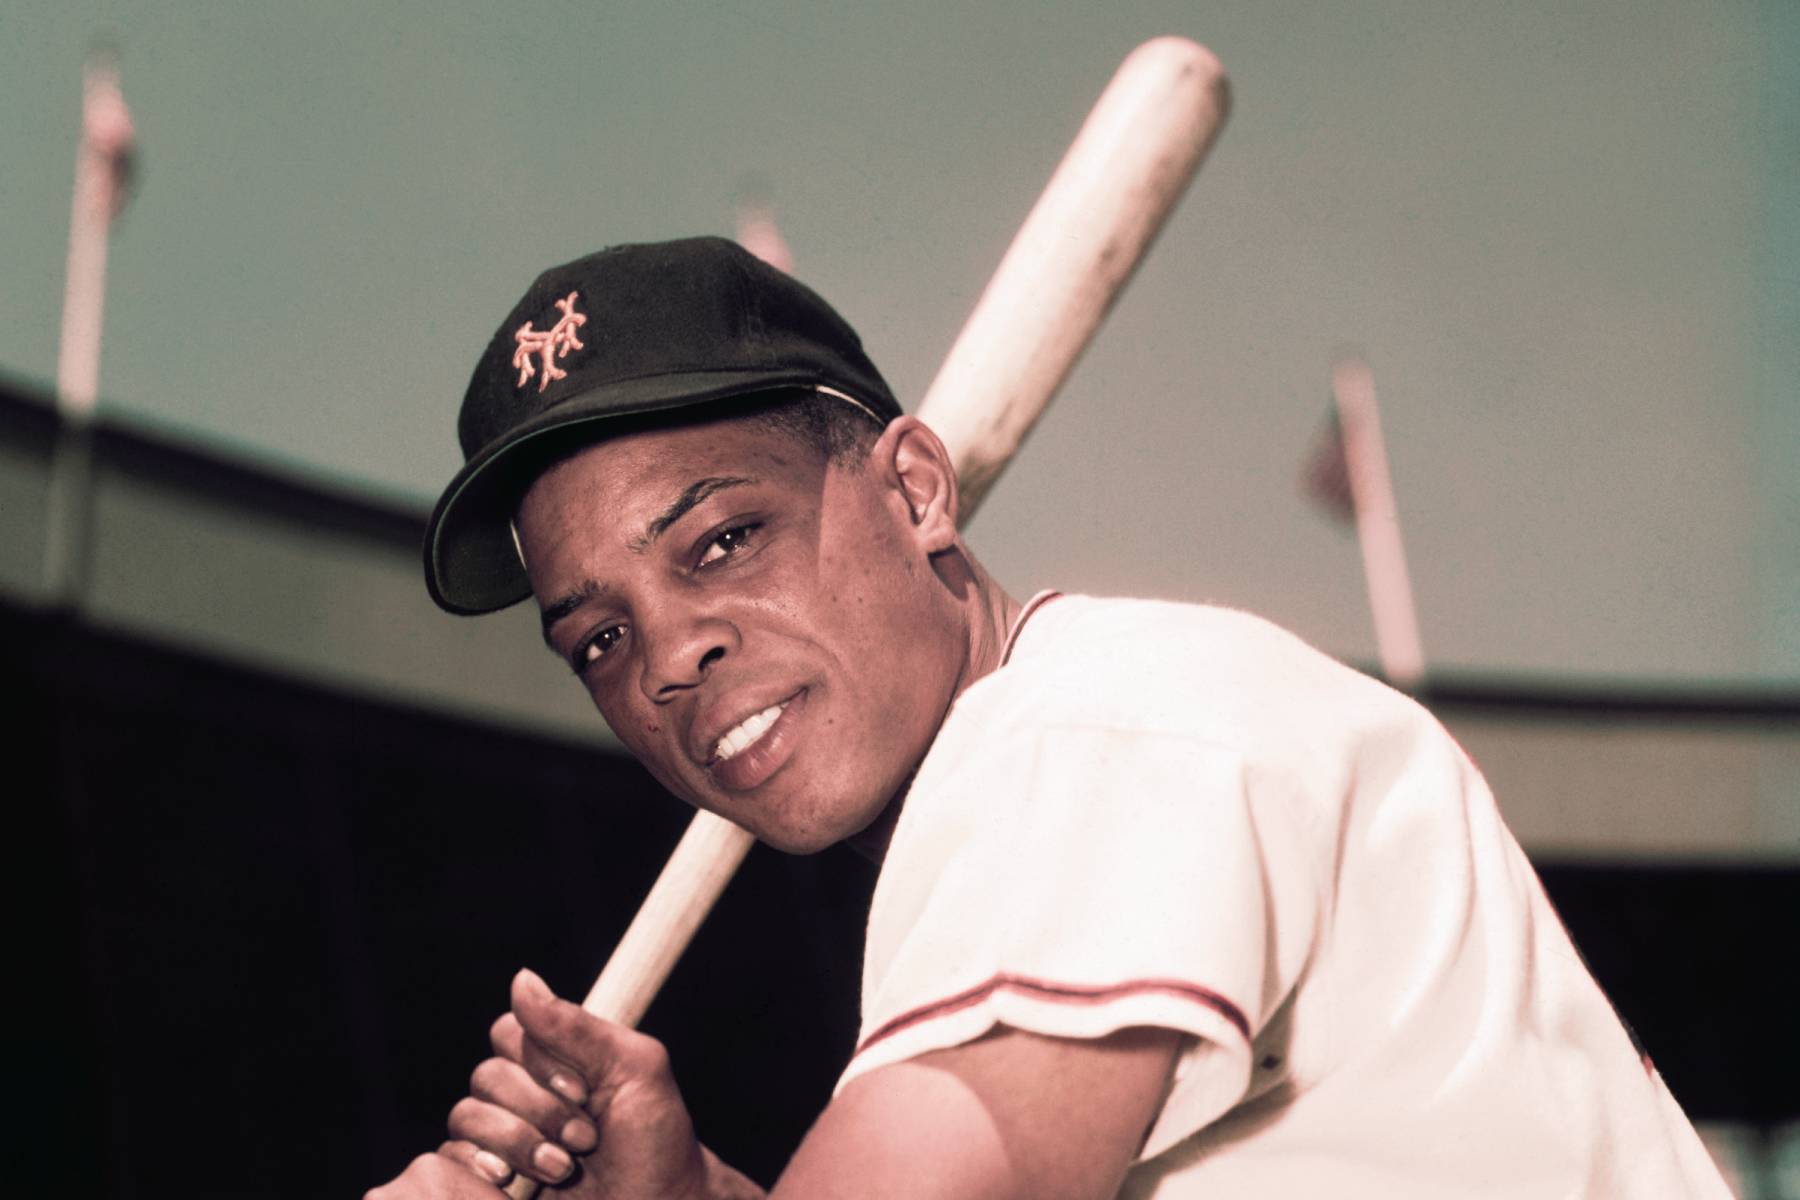 Willie Mays, Giants Legend and One of the Greatest Baseball Players of All Time, Dead at 93